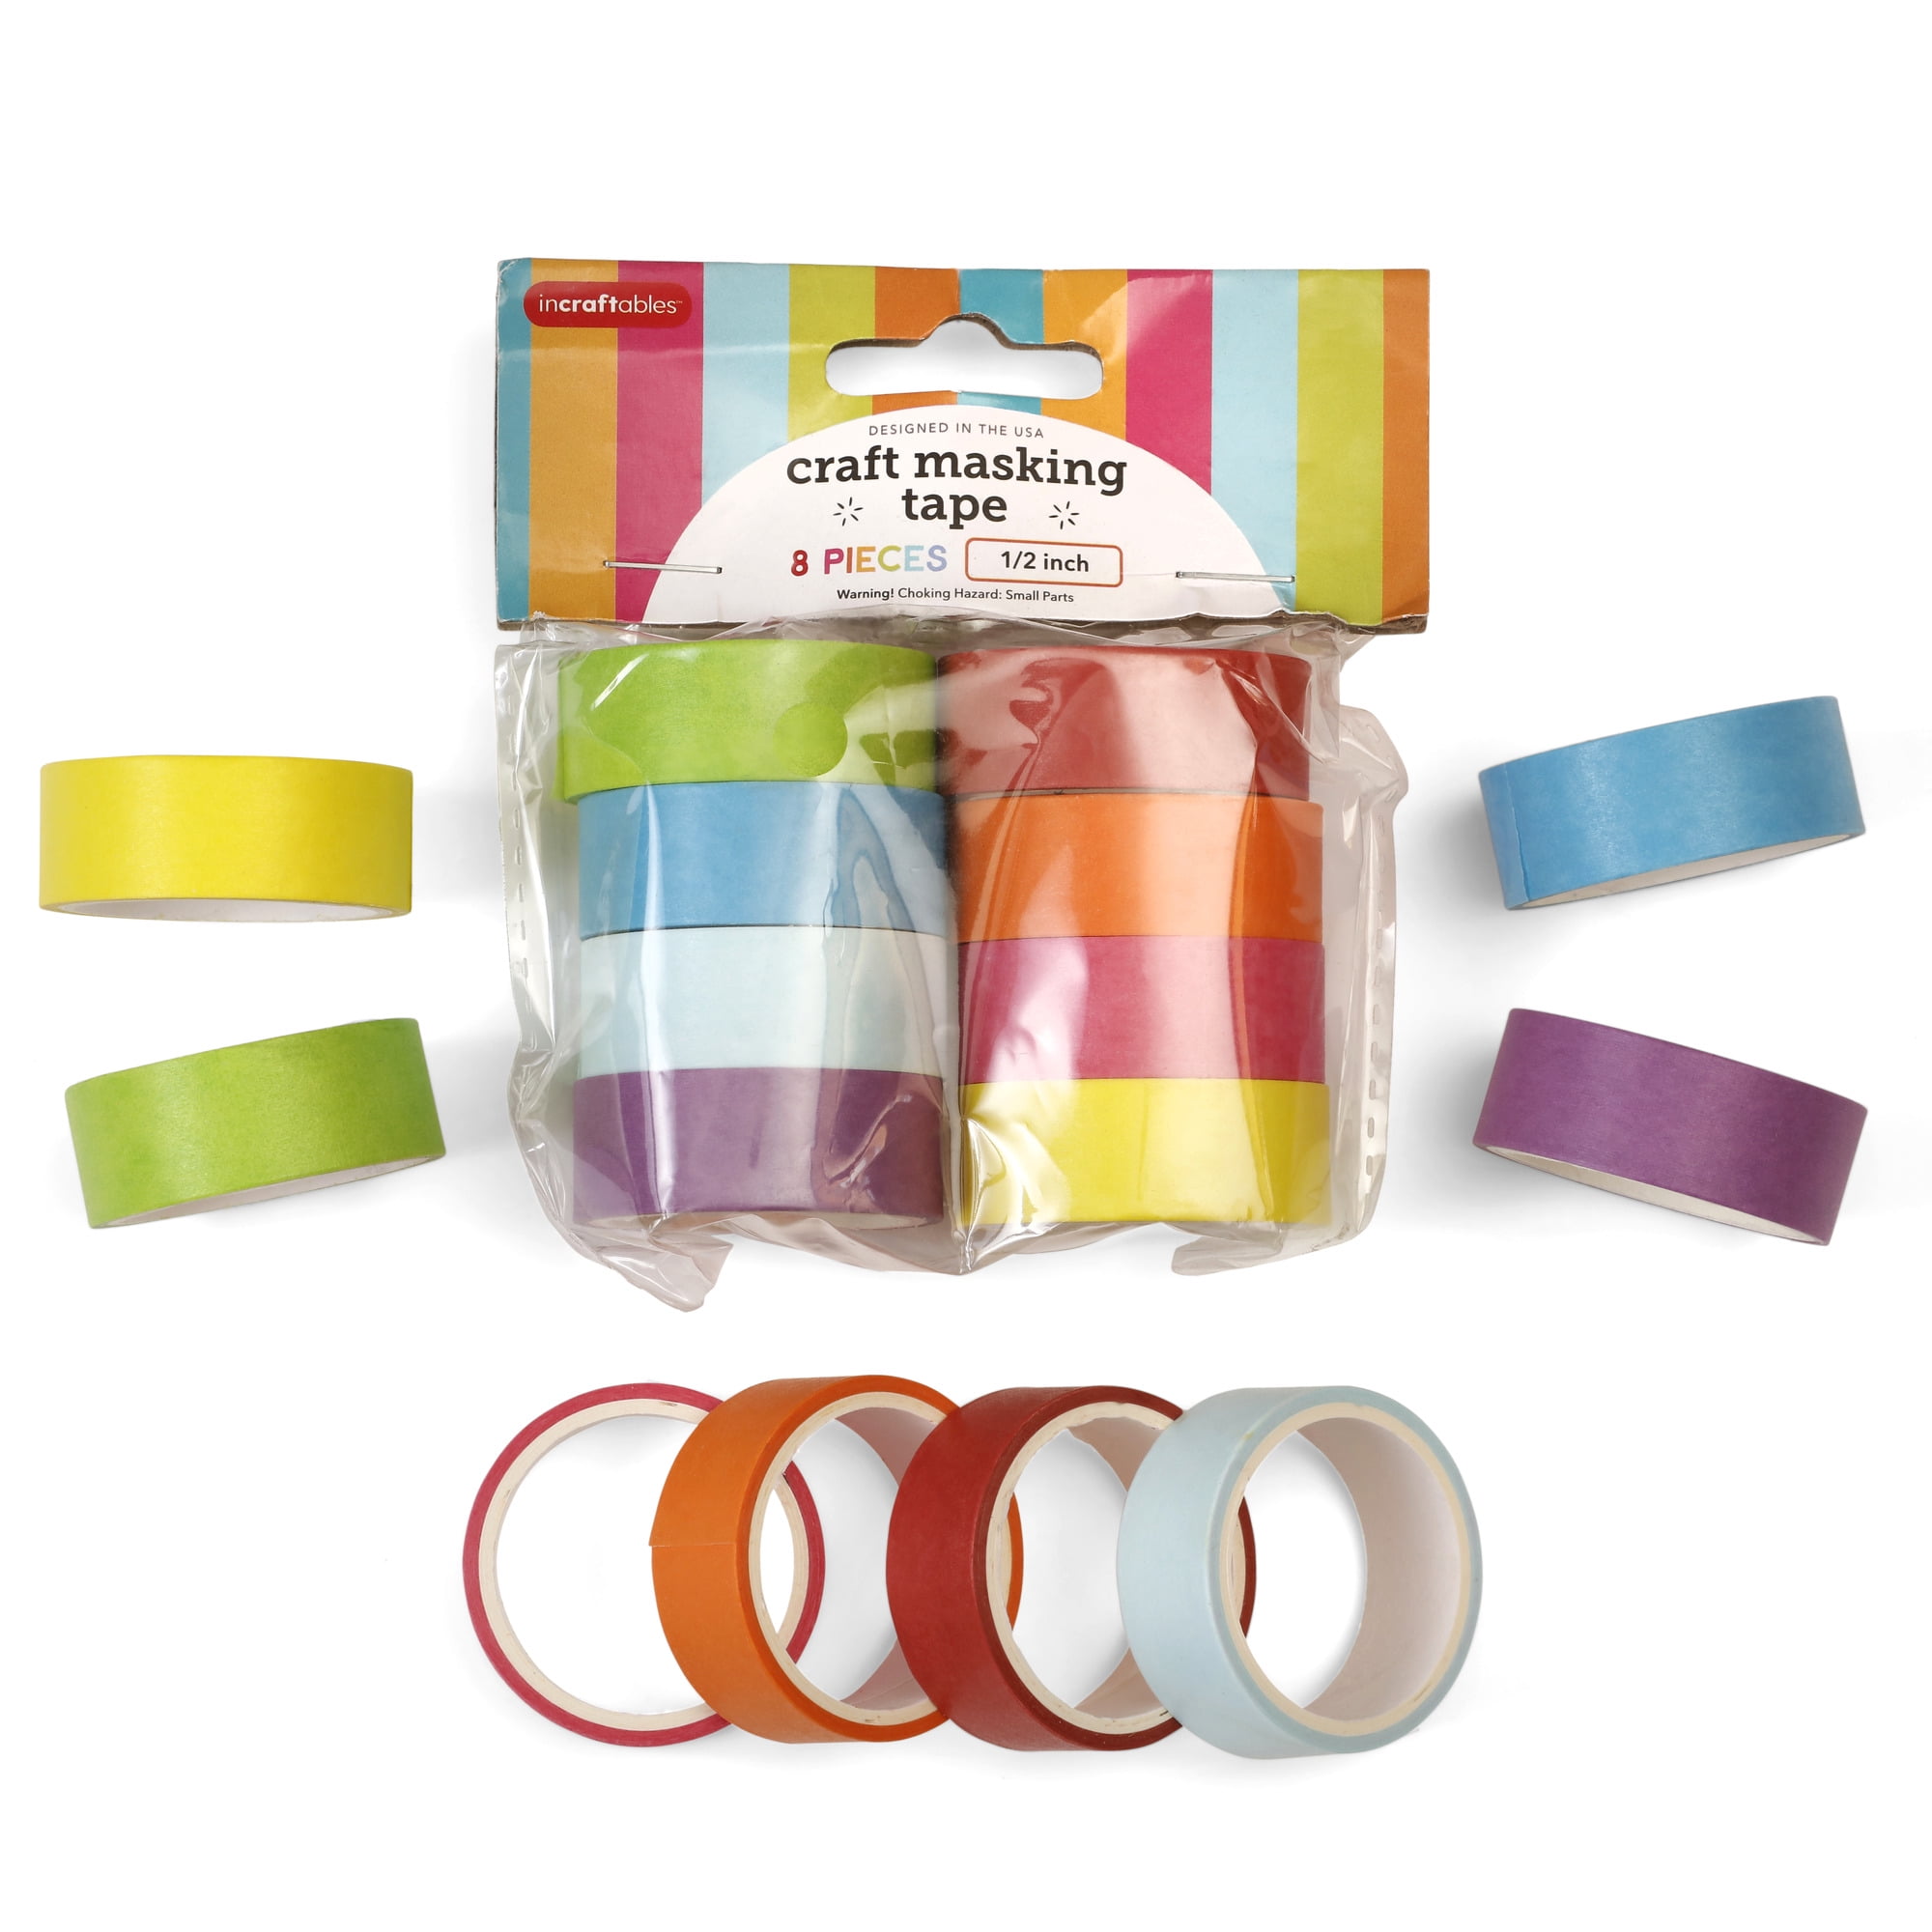 LRCXL Colored Masking Tape 10 Rolls - 1 Inch x 327 Feet of Rainbow Colors  Painters Tape, Craft Tape, Labeling Tape, Paper Tape for Party Decorations